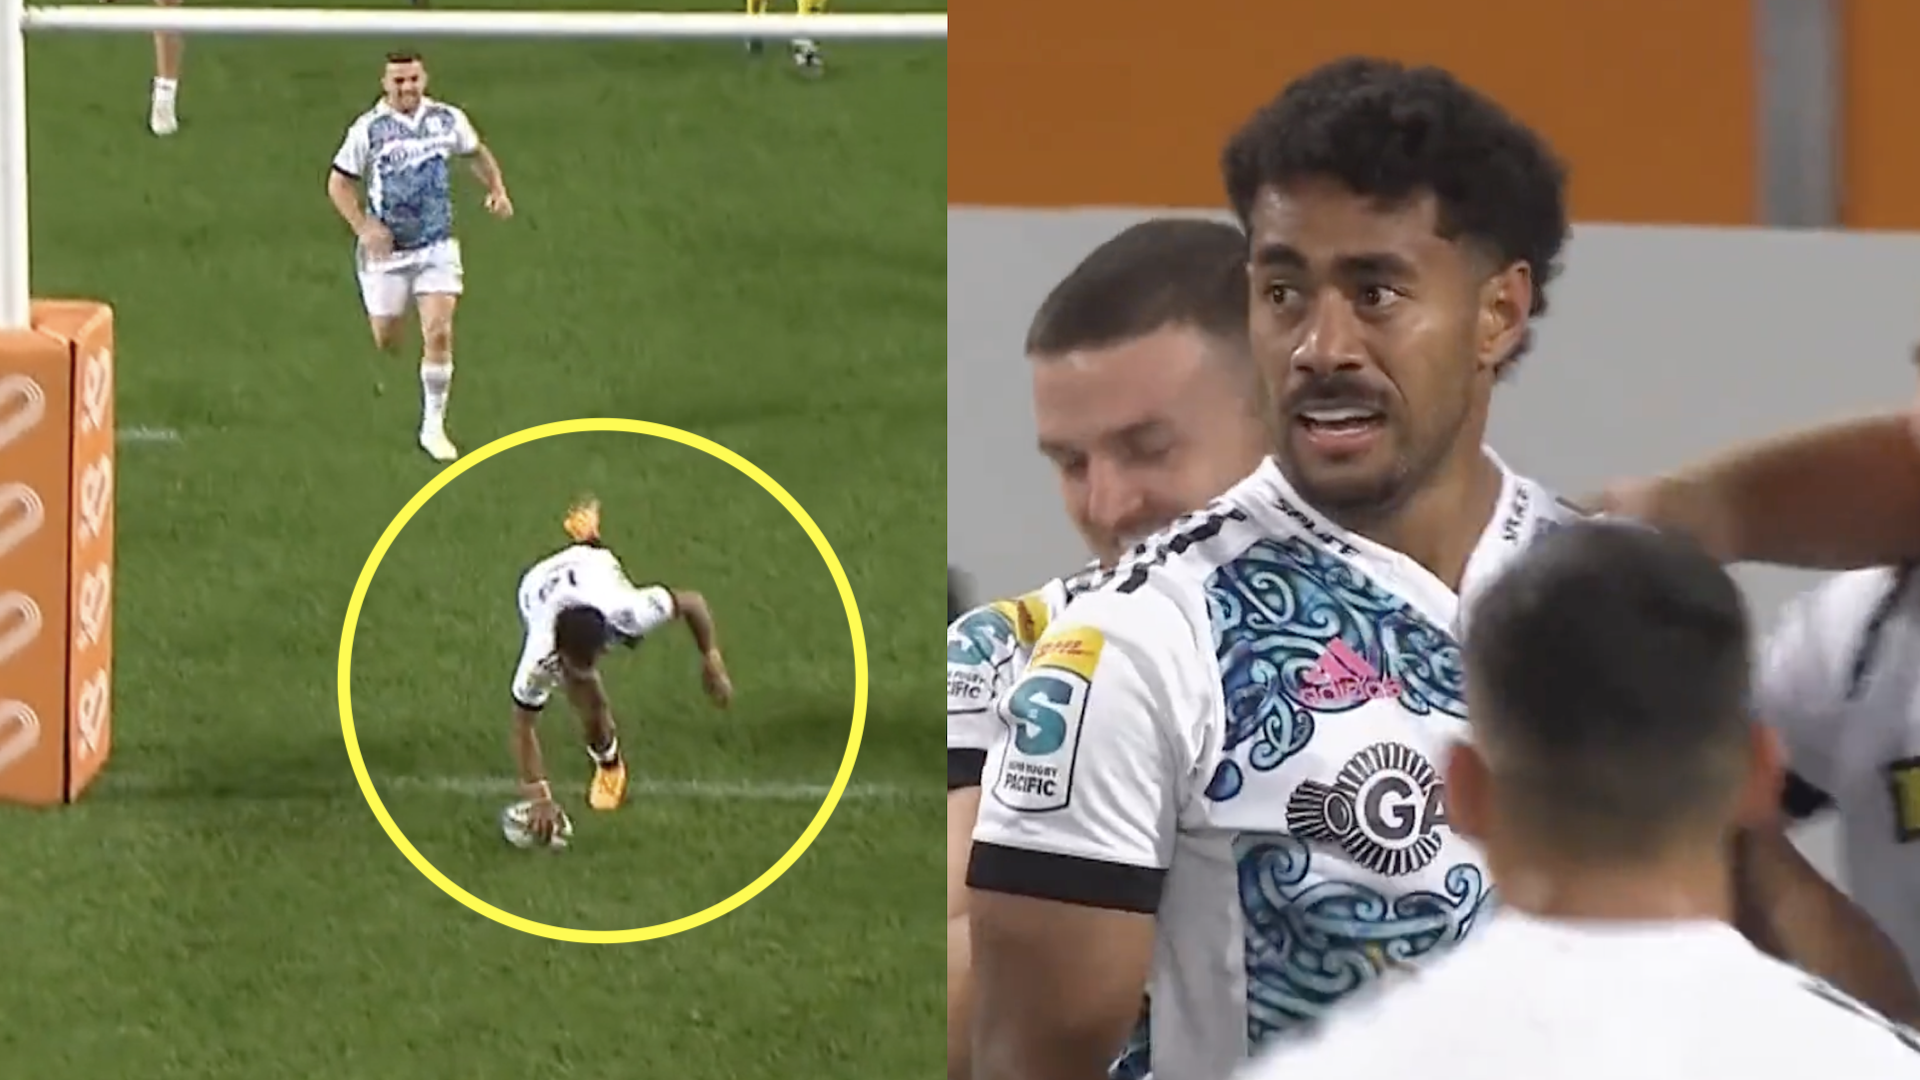 WATCH: Tackling optional as uncapped Fijian goes untouched in solo try